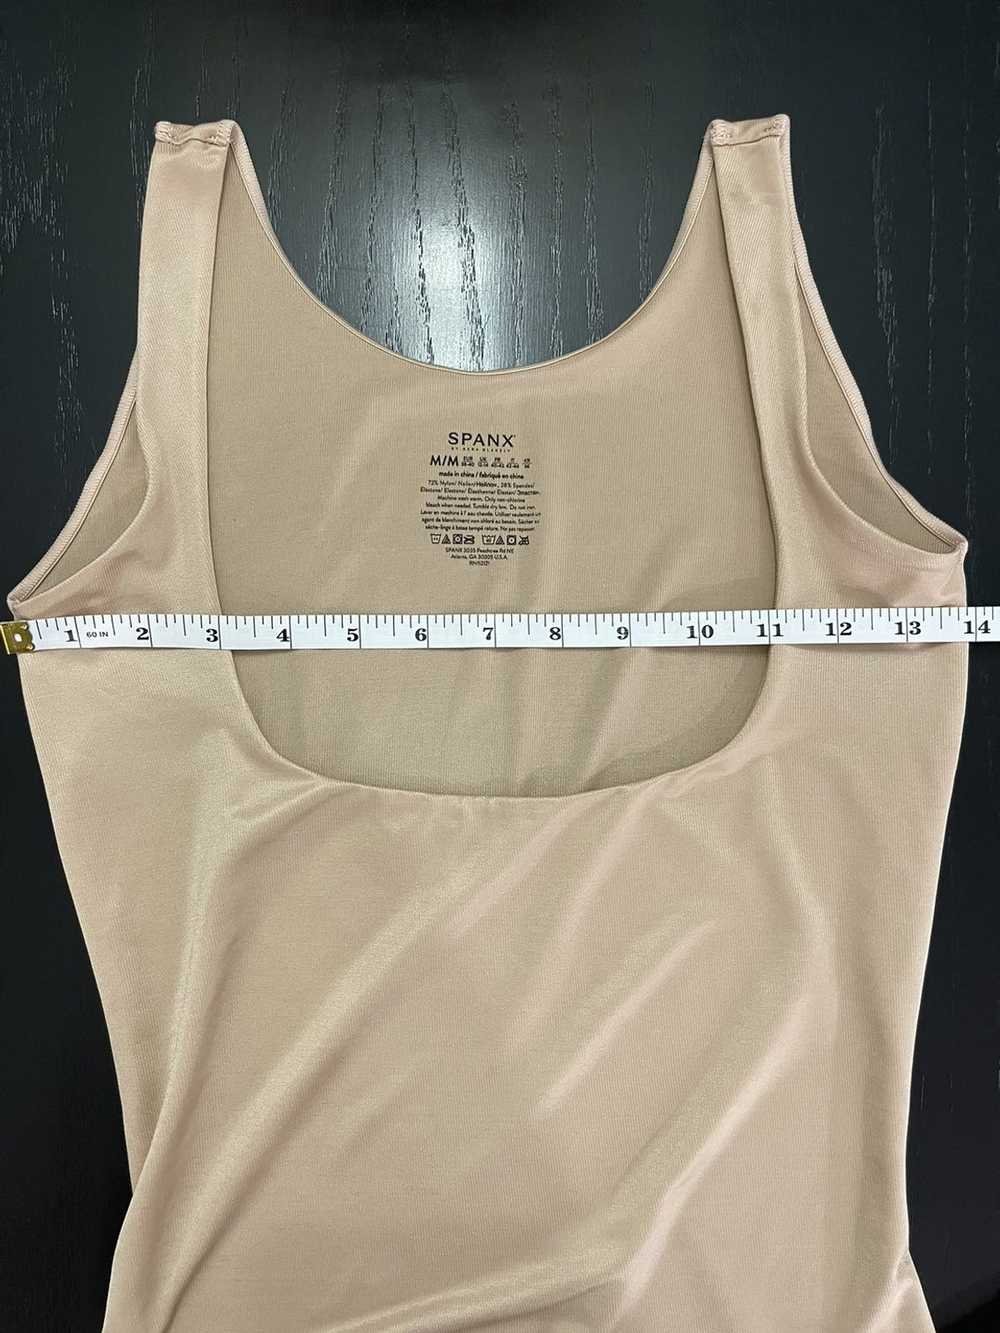 Spanx Spanx Open Front Cami - image 5